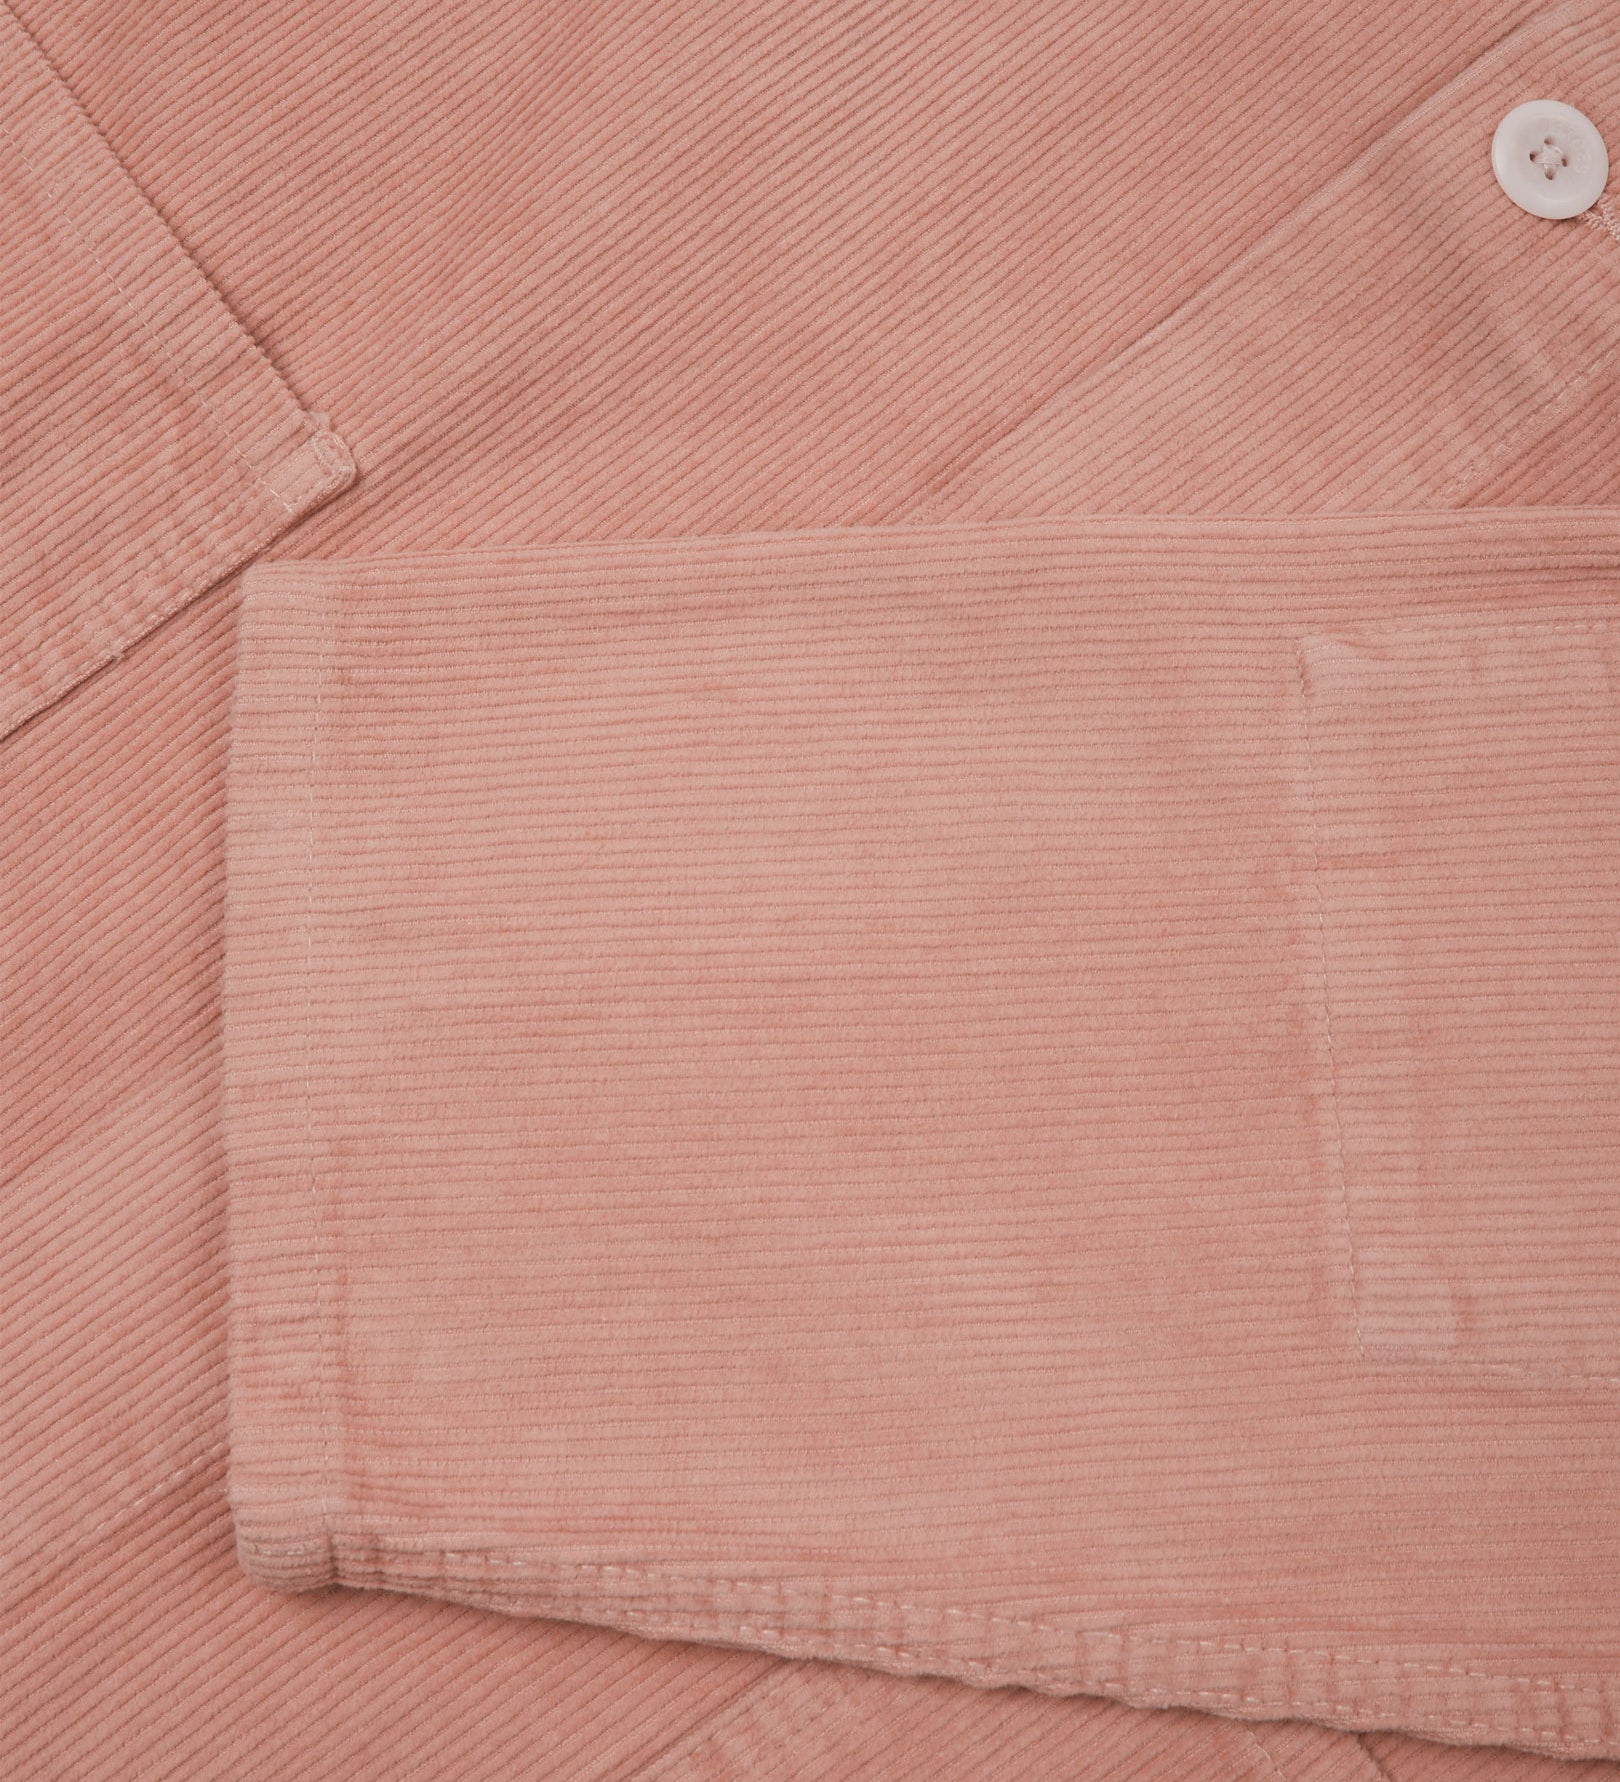 Closer view of mid section of dusty pink, buttoned corduroy overshirt from Uskees. Focus on cuff, pockets, corozo buttons and corduroy texture.